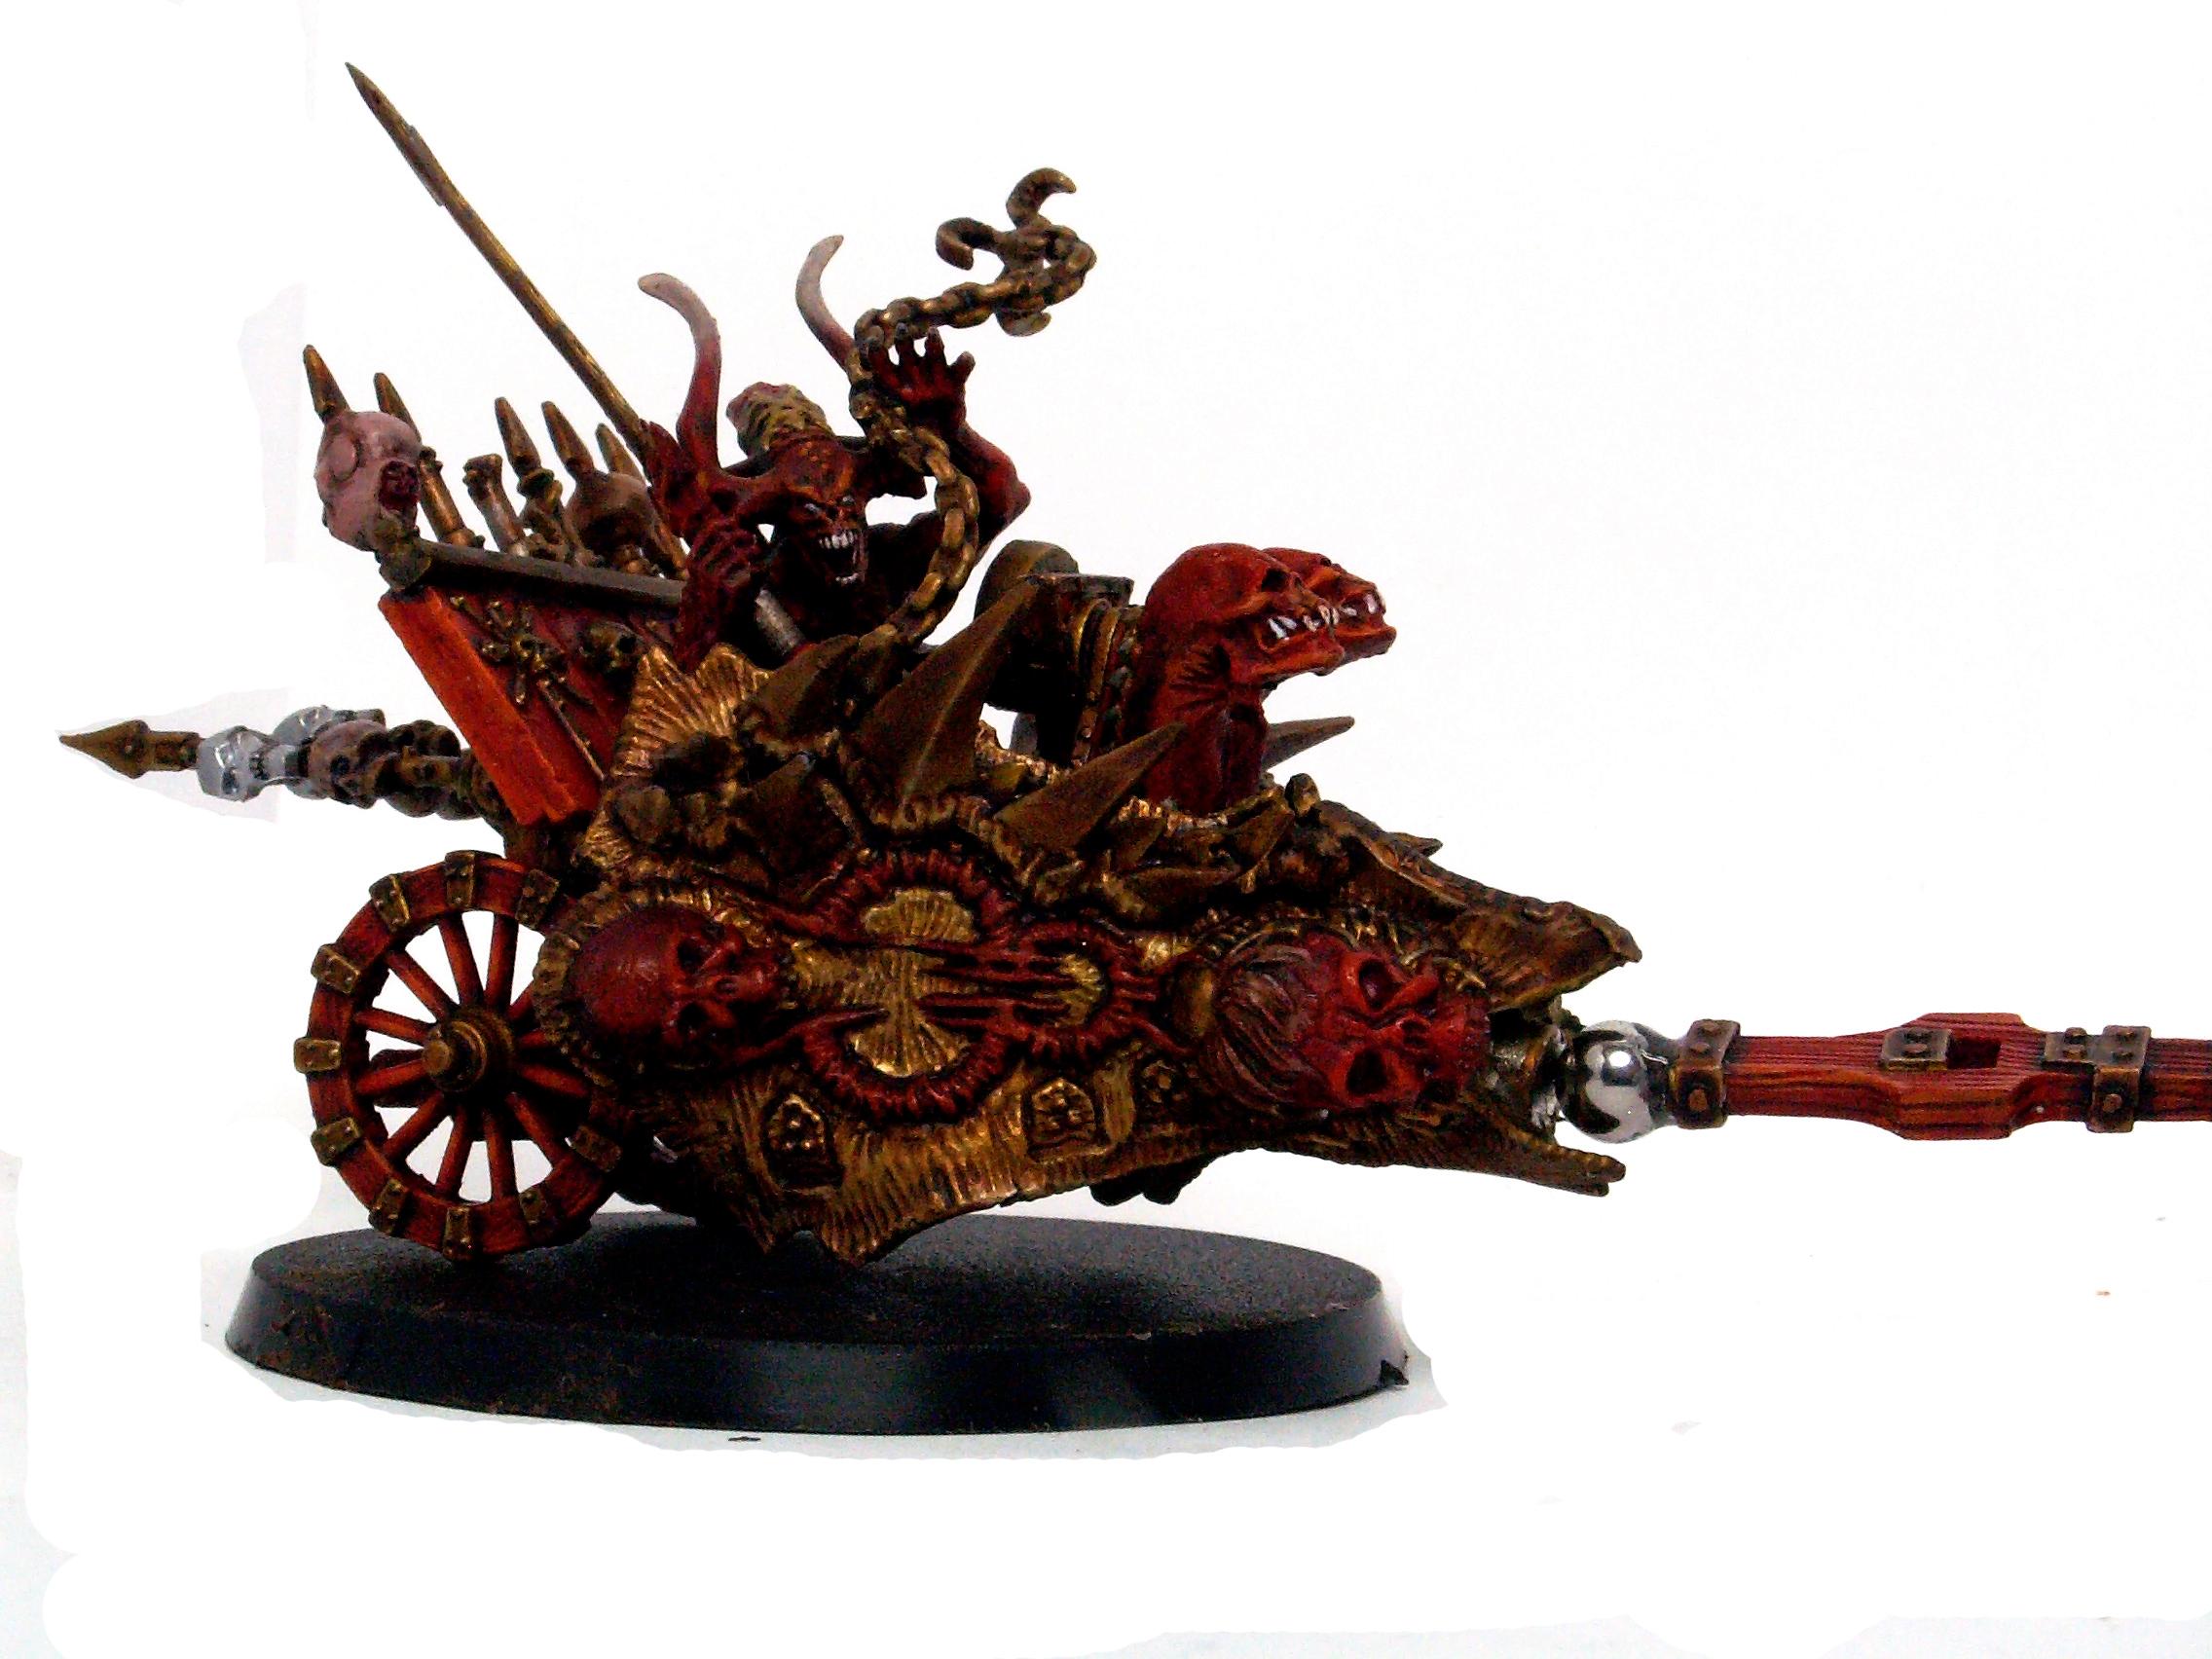 Chaos, Chaos Daemons, Chaos Space Marines, Chariot, Conversion, Daemons, Herald, Herald Of Khorne, Herald On Chariot, Khorne, Warhammer 40,000